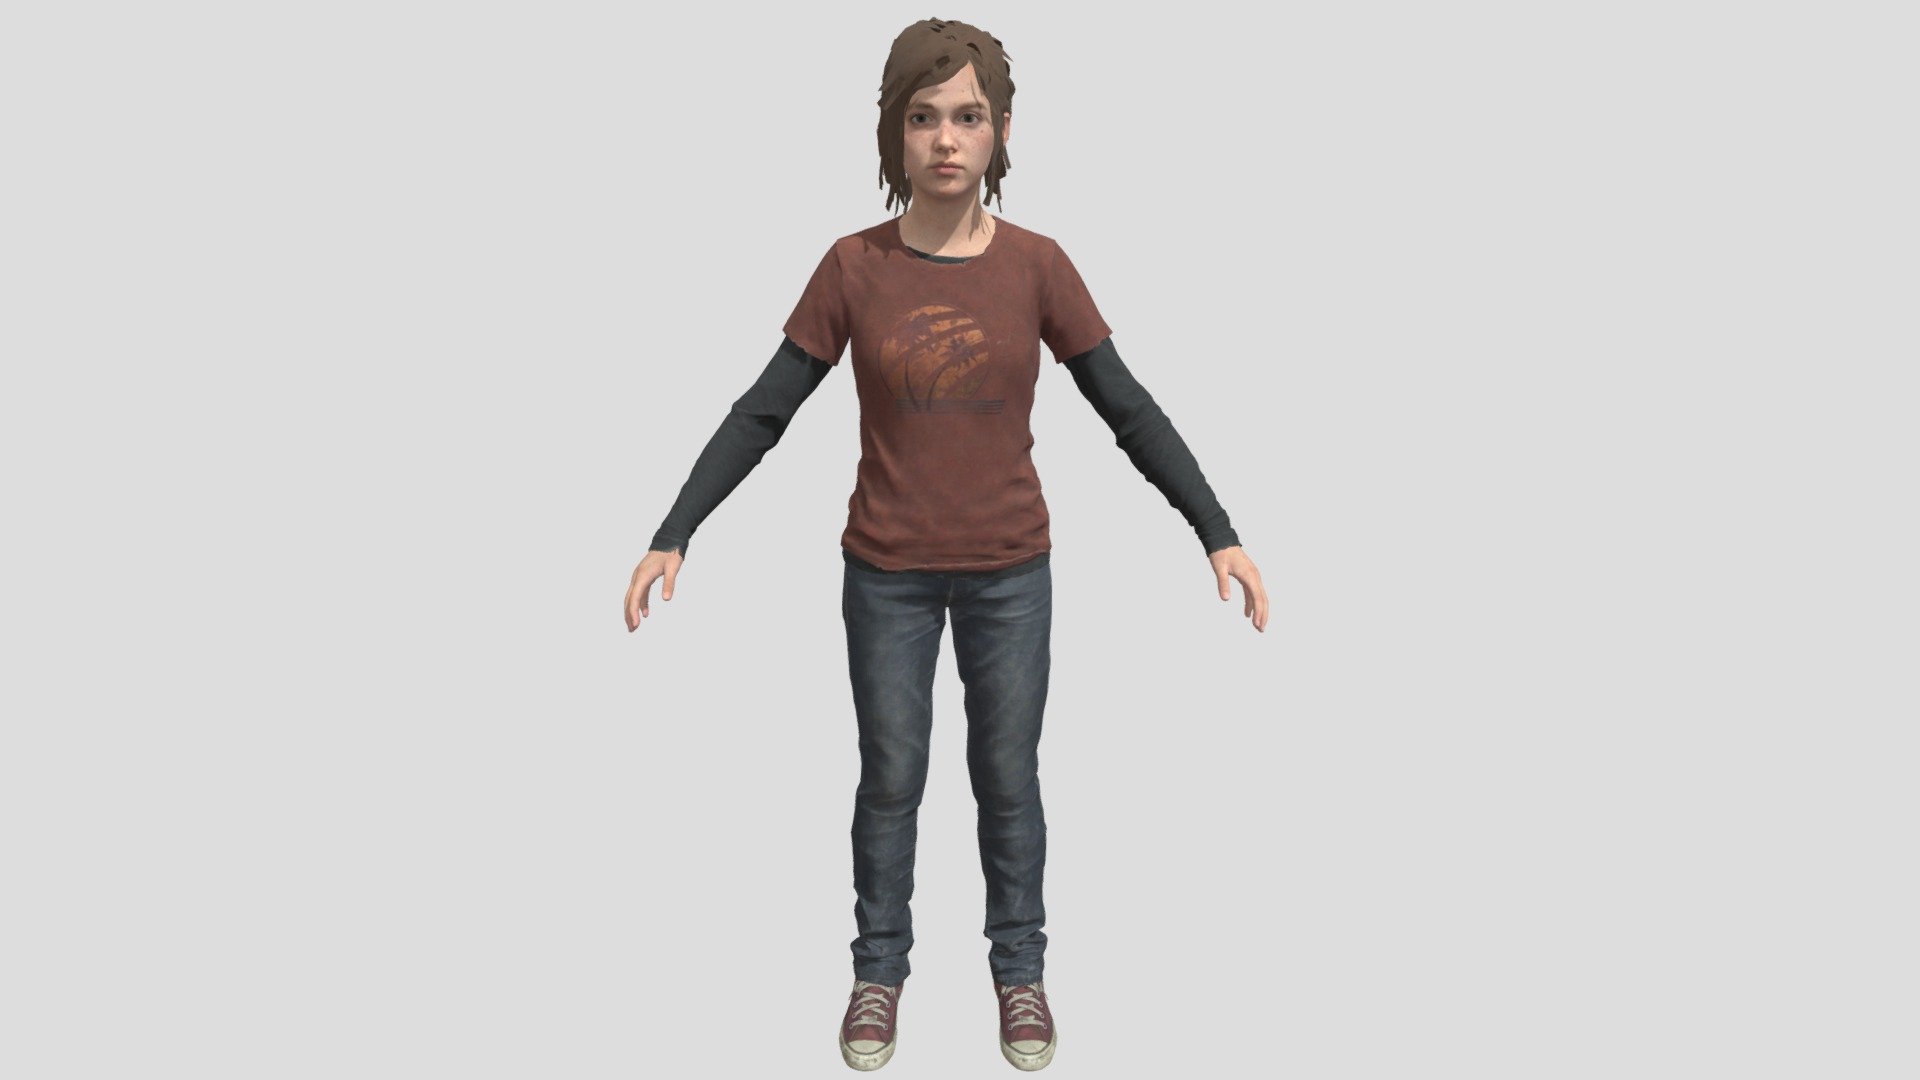 The Last Of Us 2: Young Ellie 3D Model free download for Unity and Unreal Engine!!!!!!!!!!!!!!!!!!

MY CODE CREATOR IN FORTNITE: TEAMEW

FIND ME ON YOUTUBE: E.W. amazing games - The Last Of Us 2: Young Ellie - Download Free 3D model by EWTube0 3d model